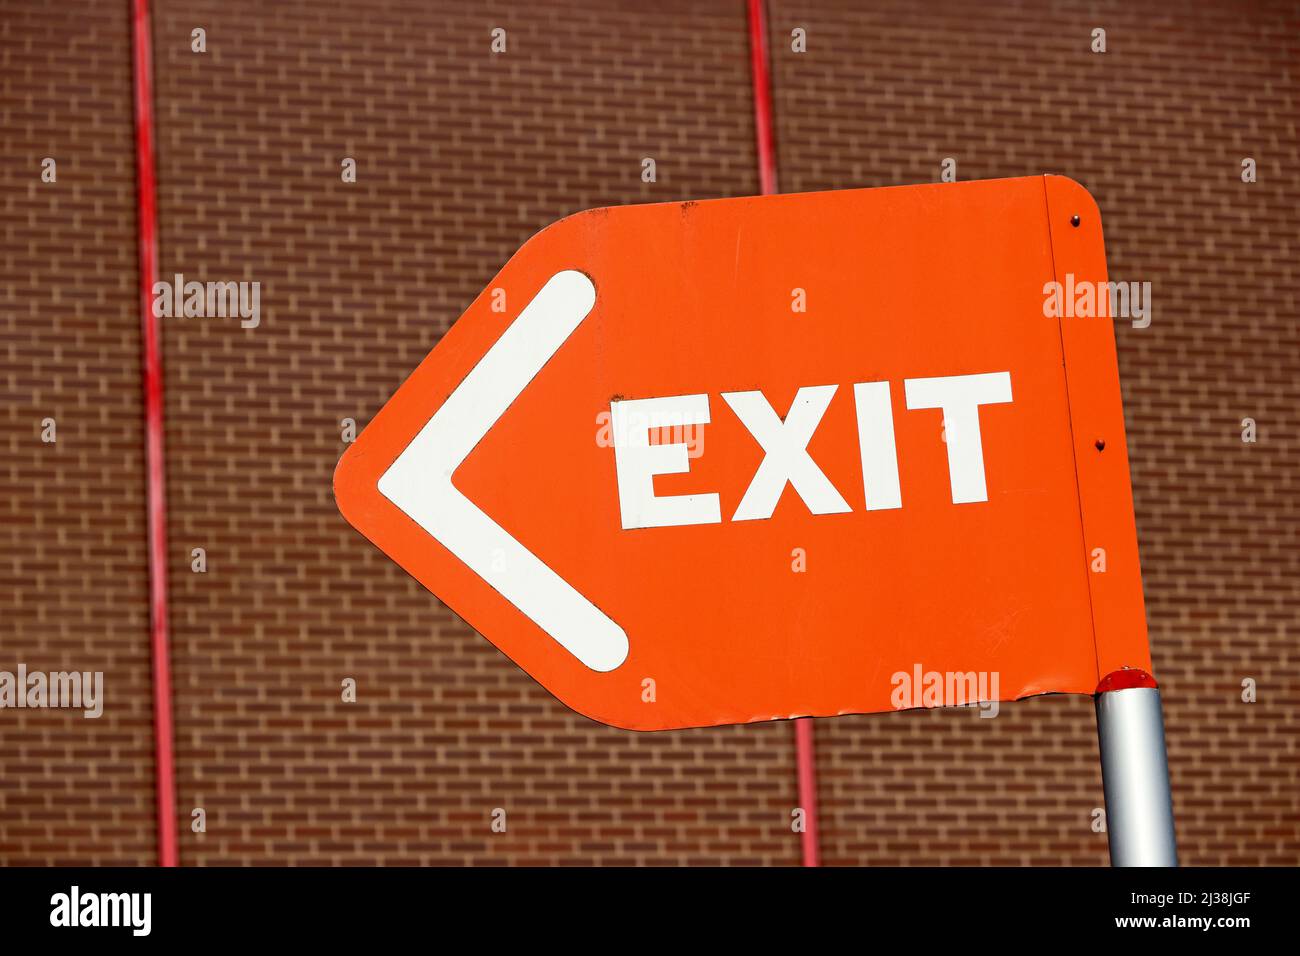 Orange and white Exit sign against brick wall background Stock Photo